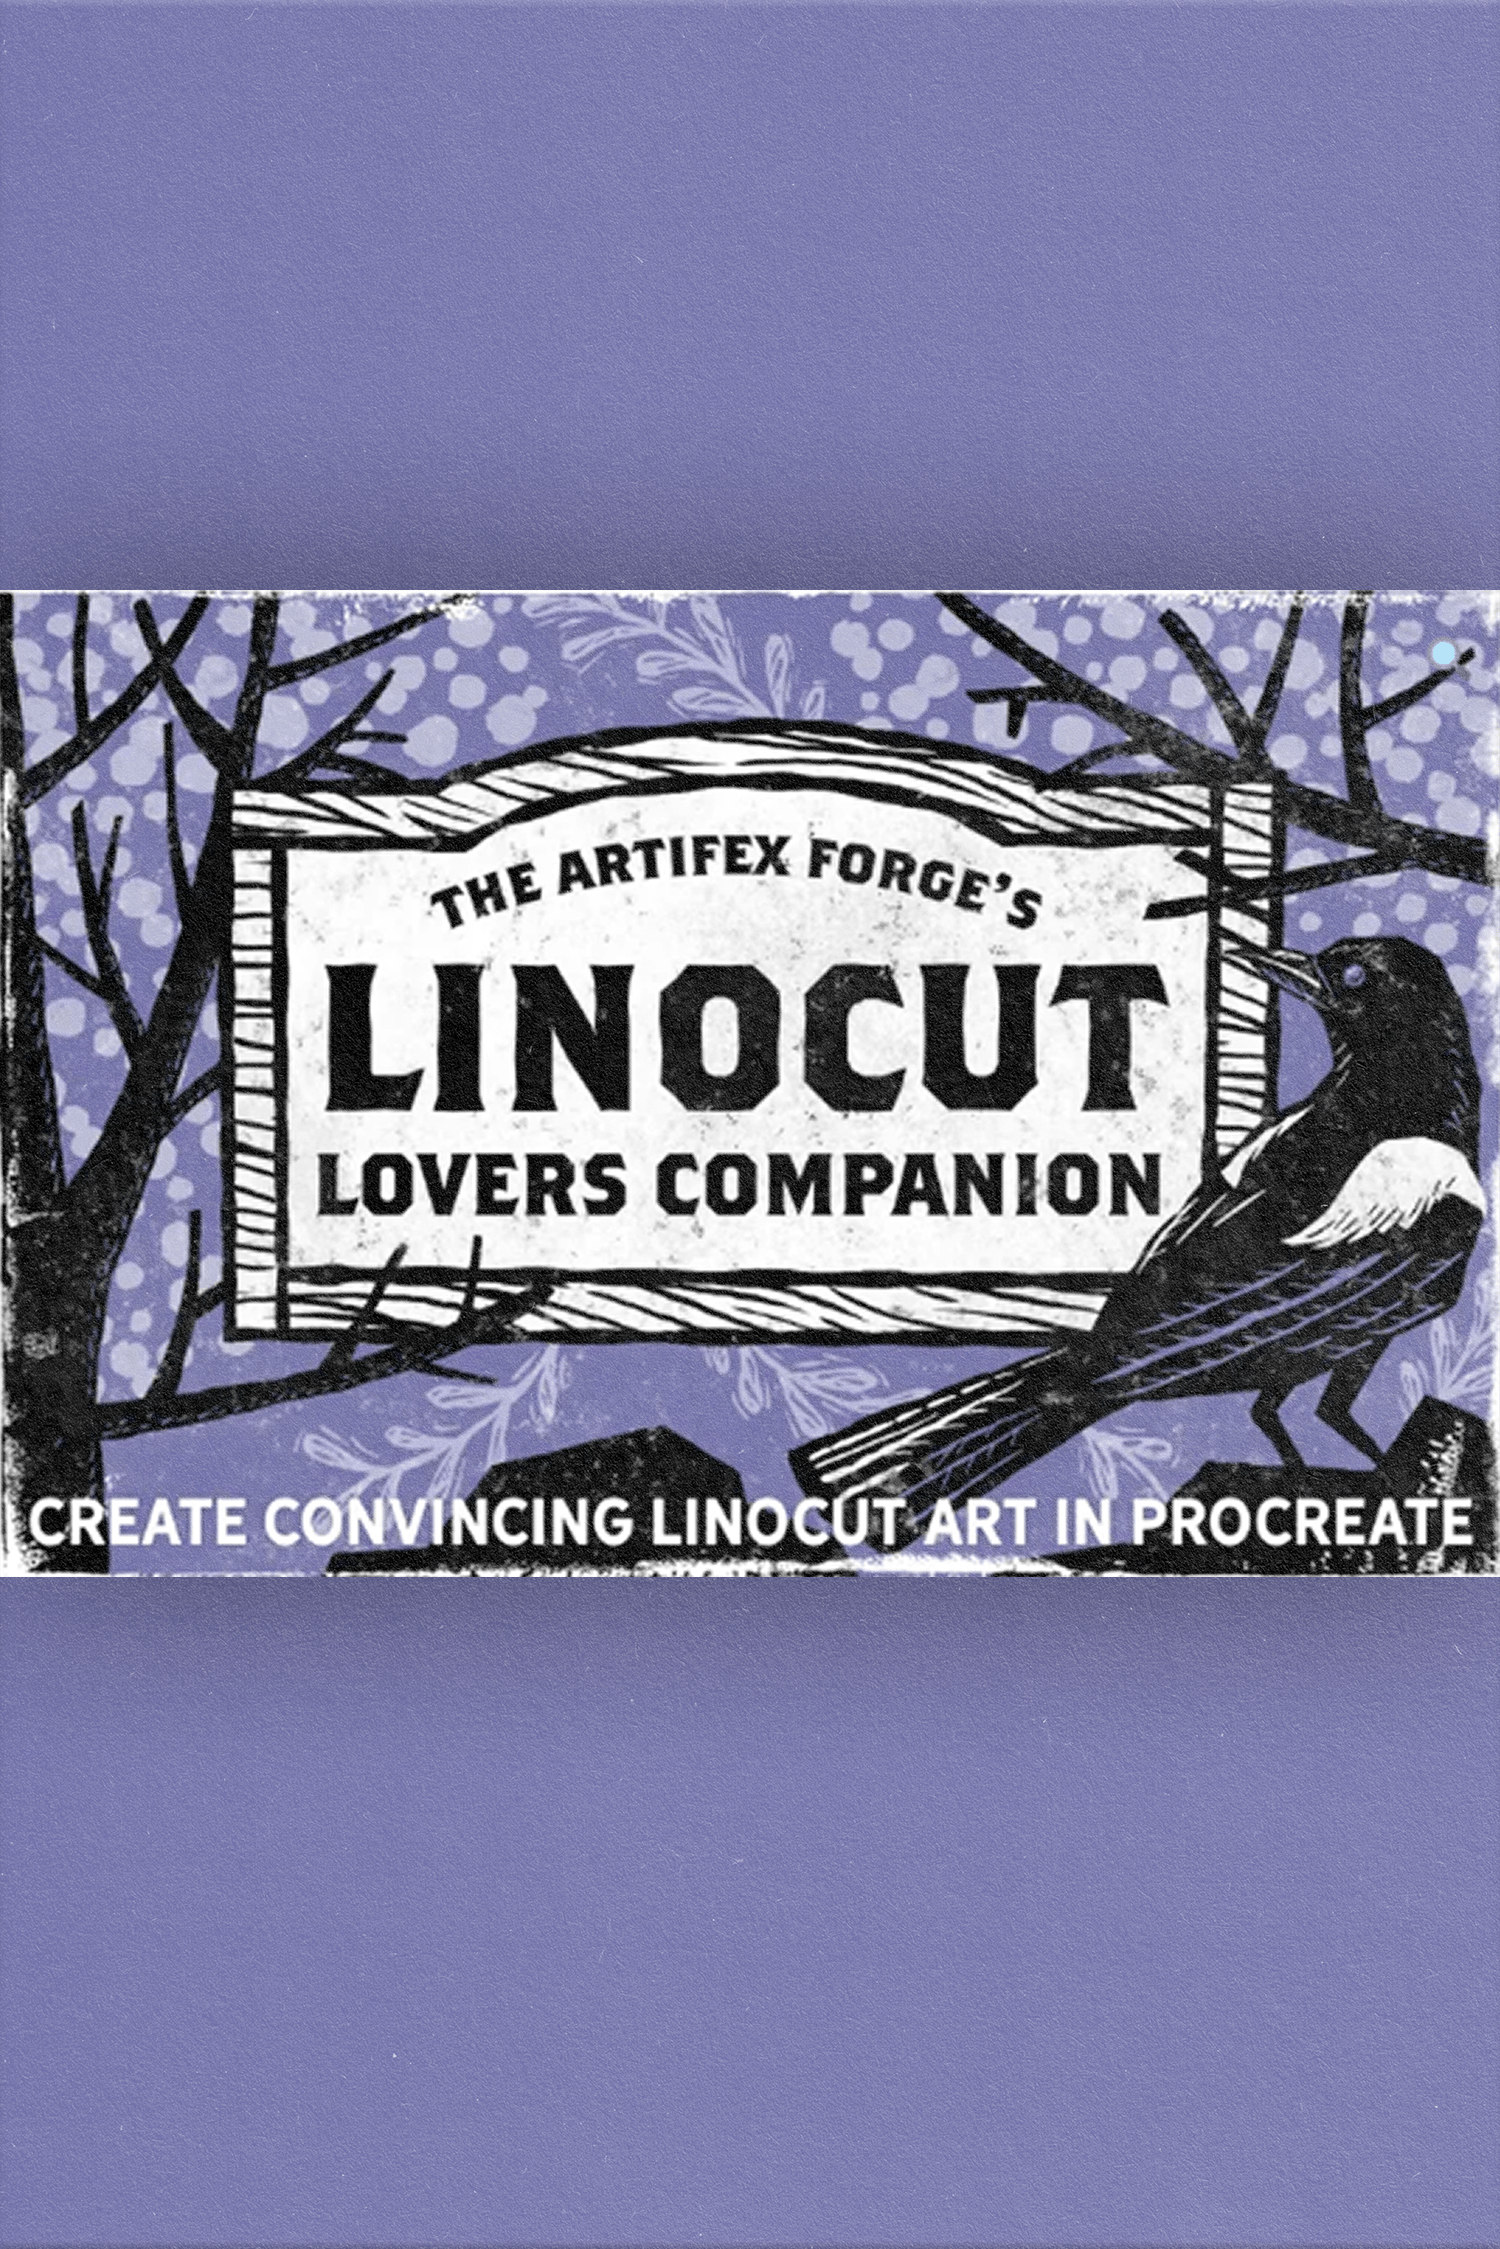 Linocut lovers companion Toolkit by Artifex Forge